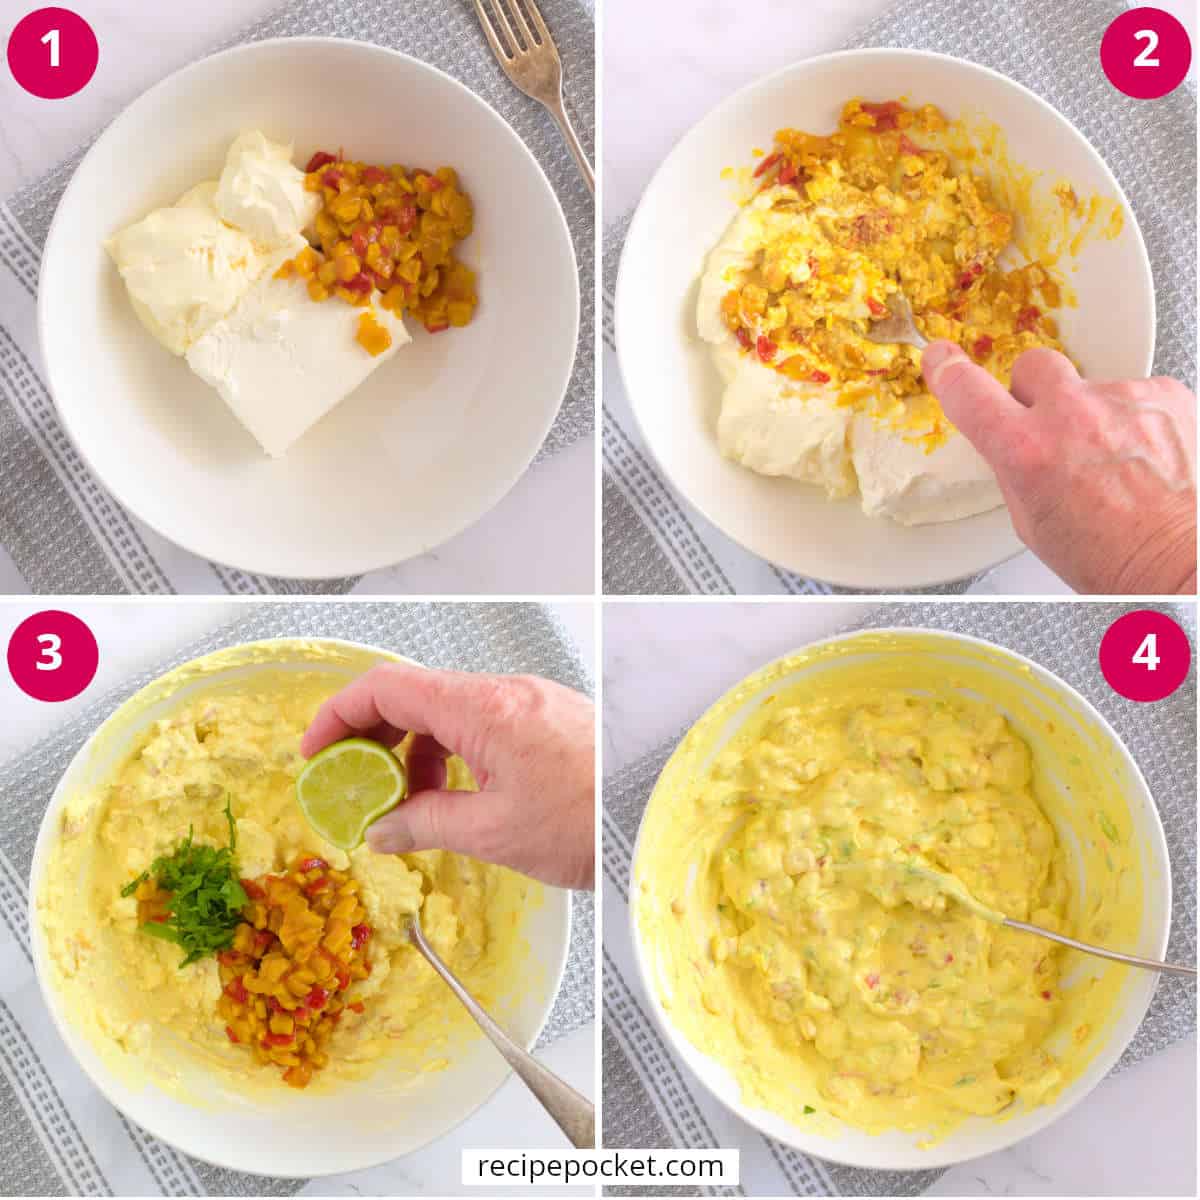 Four part step by step image for making dip.